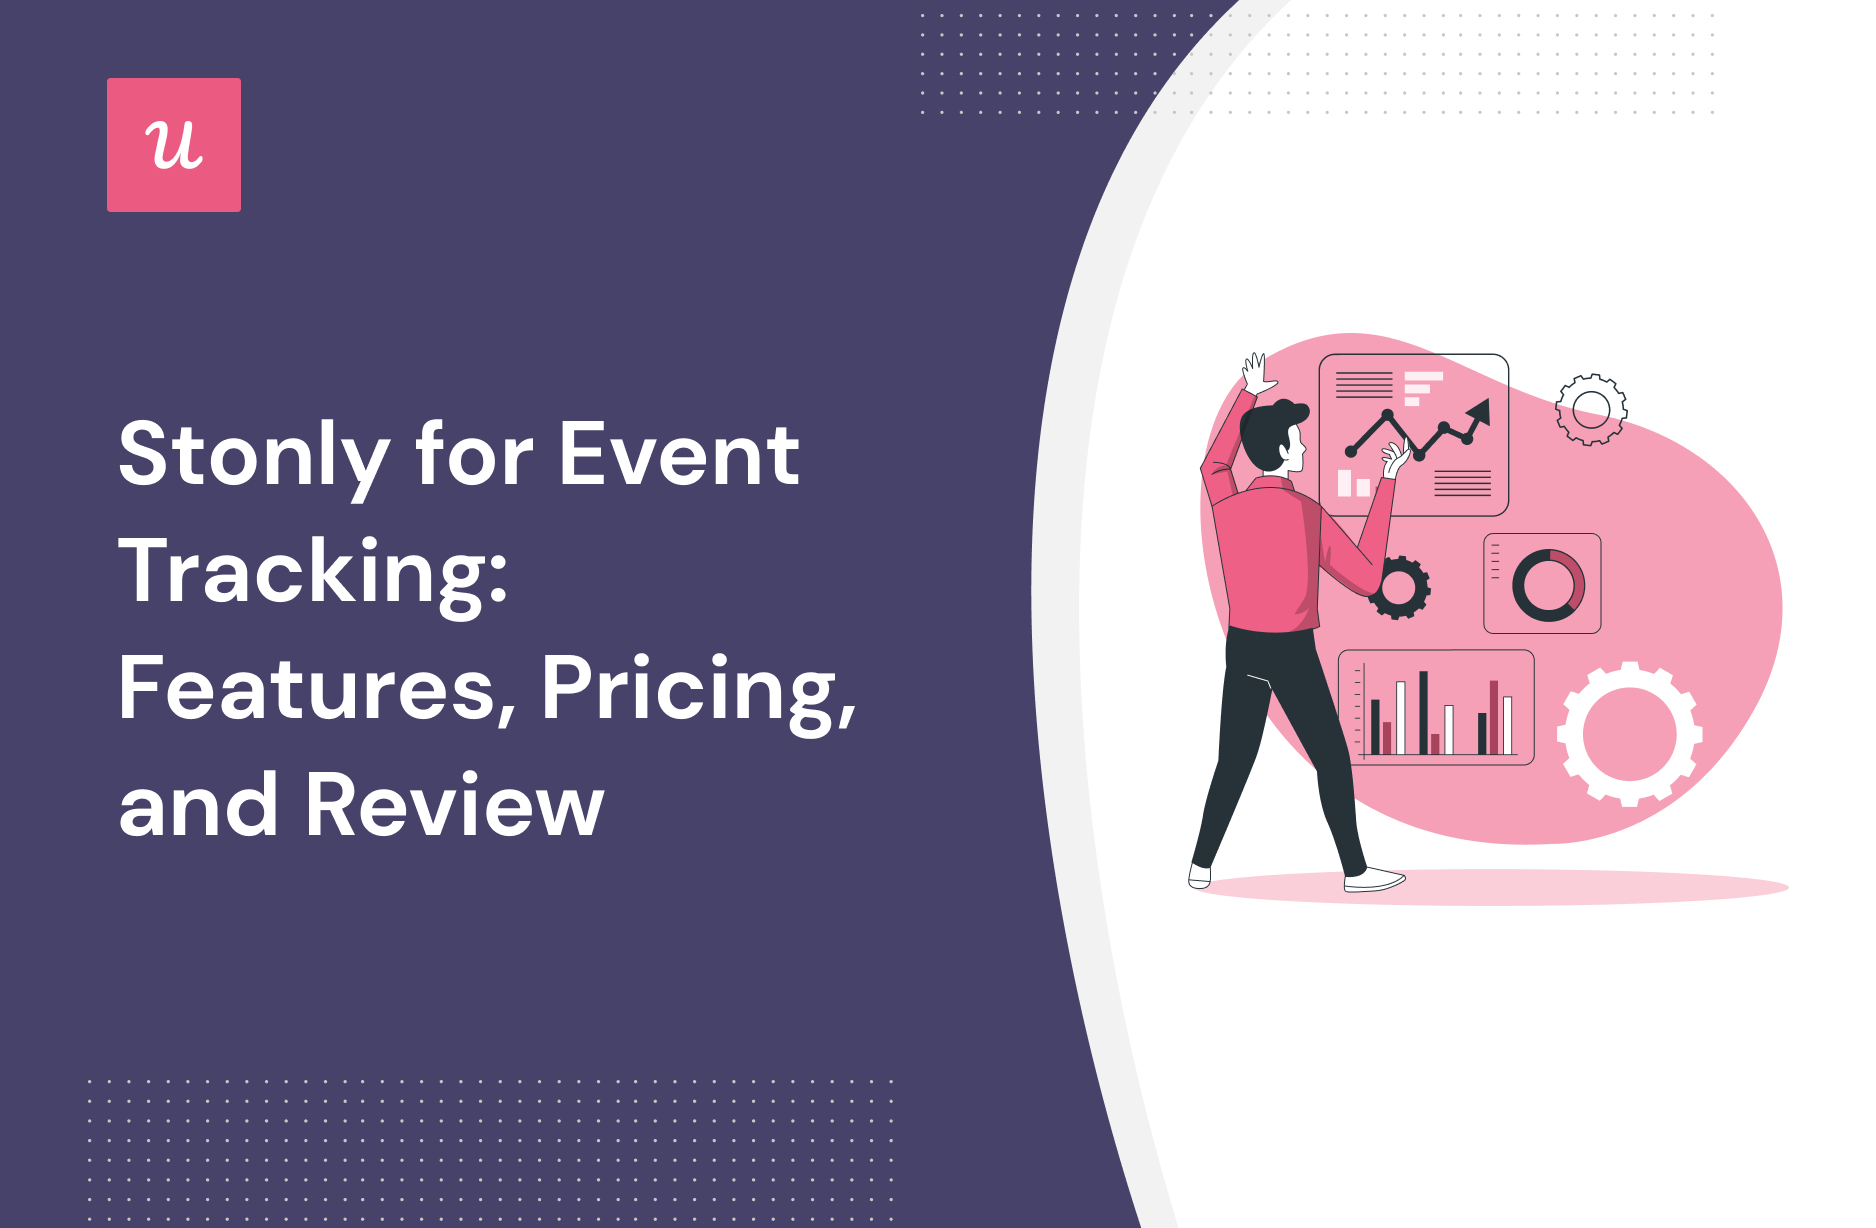 Stonly for Event Tracking: Features, Pricing, and Review